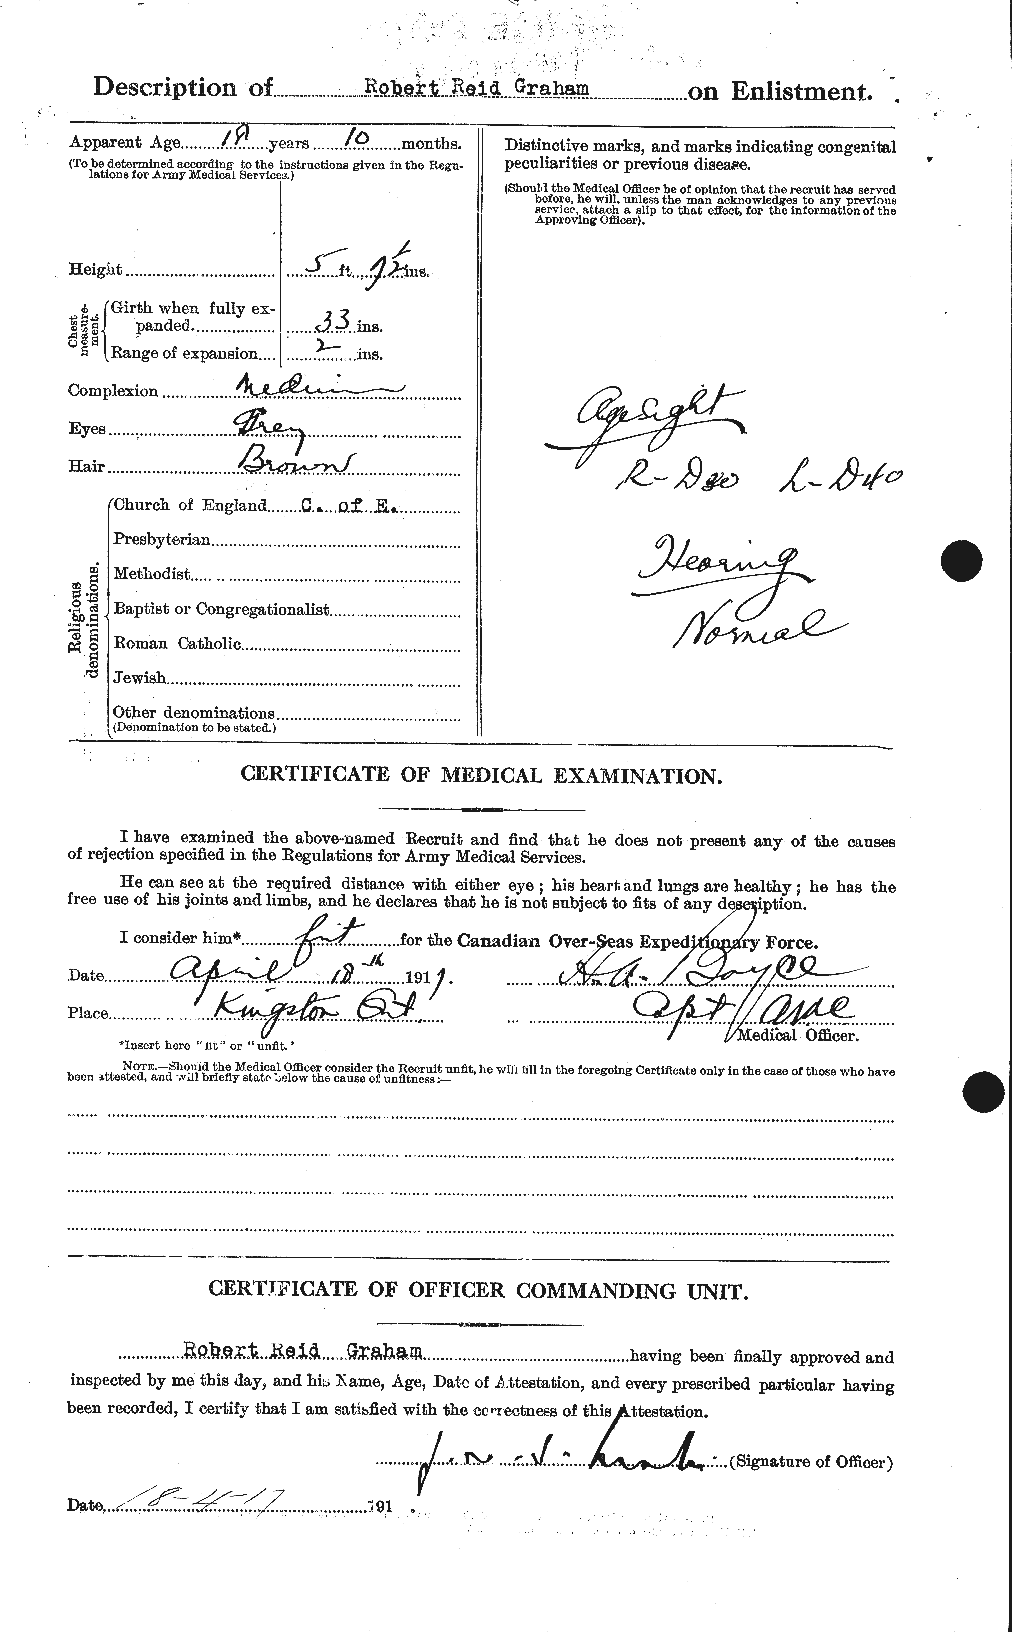 Personnel Records of the First World War - CEF 359421b